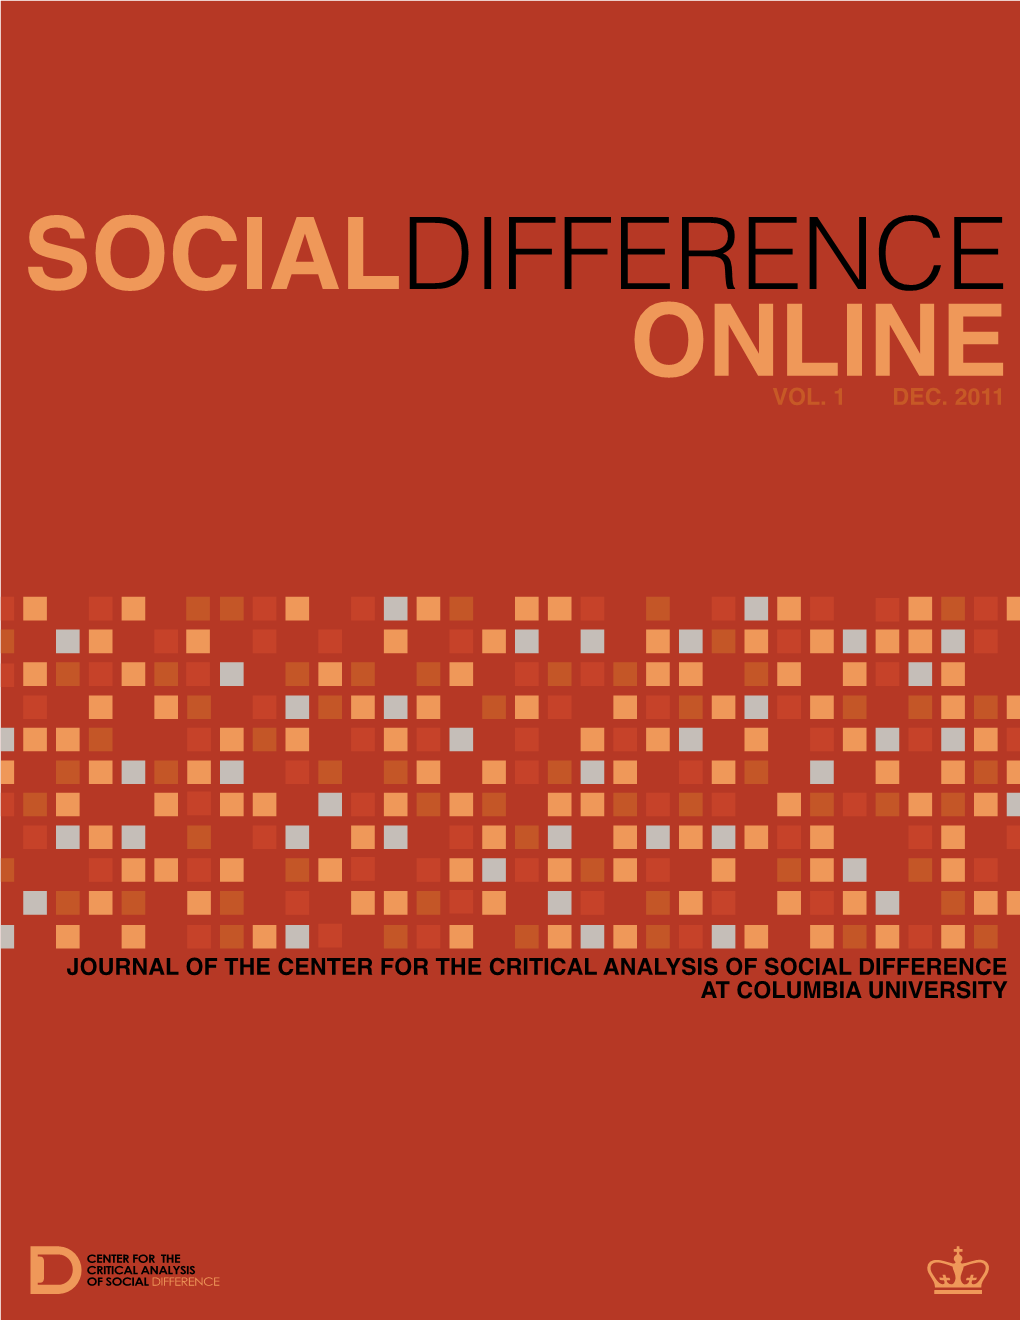 Socialdifference Online